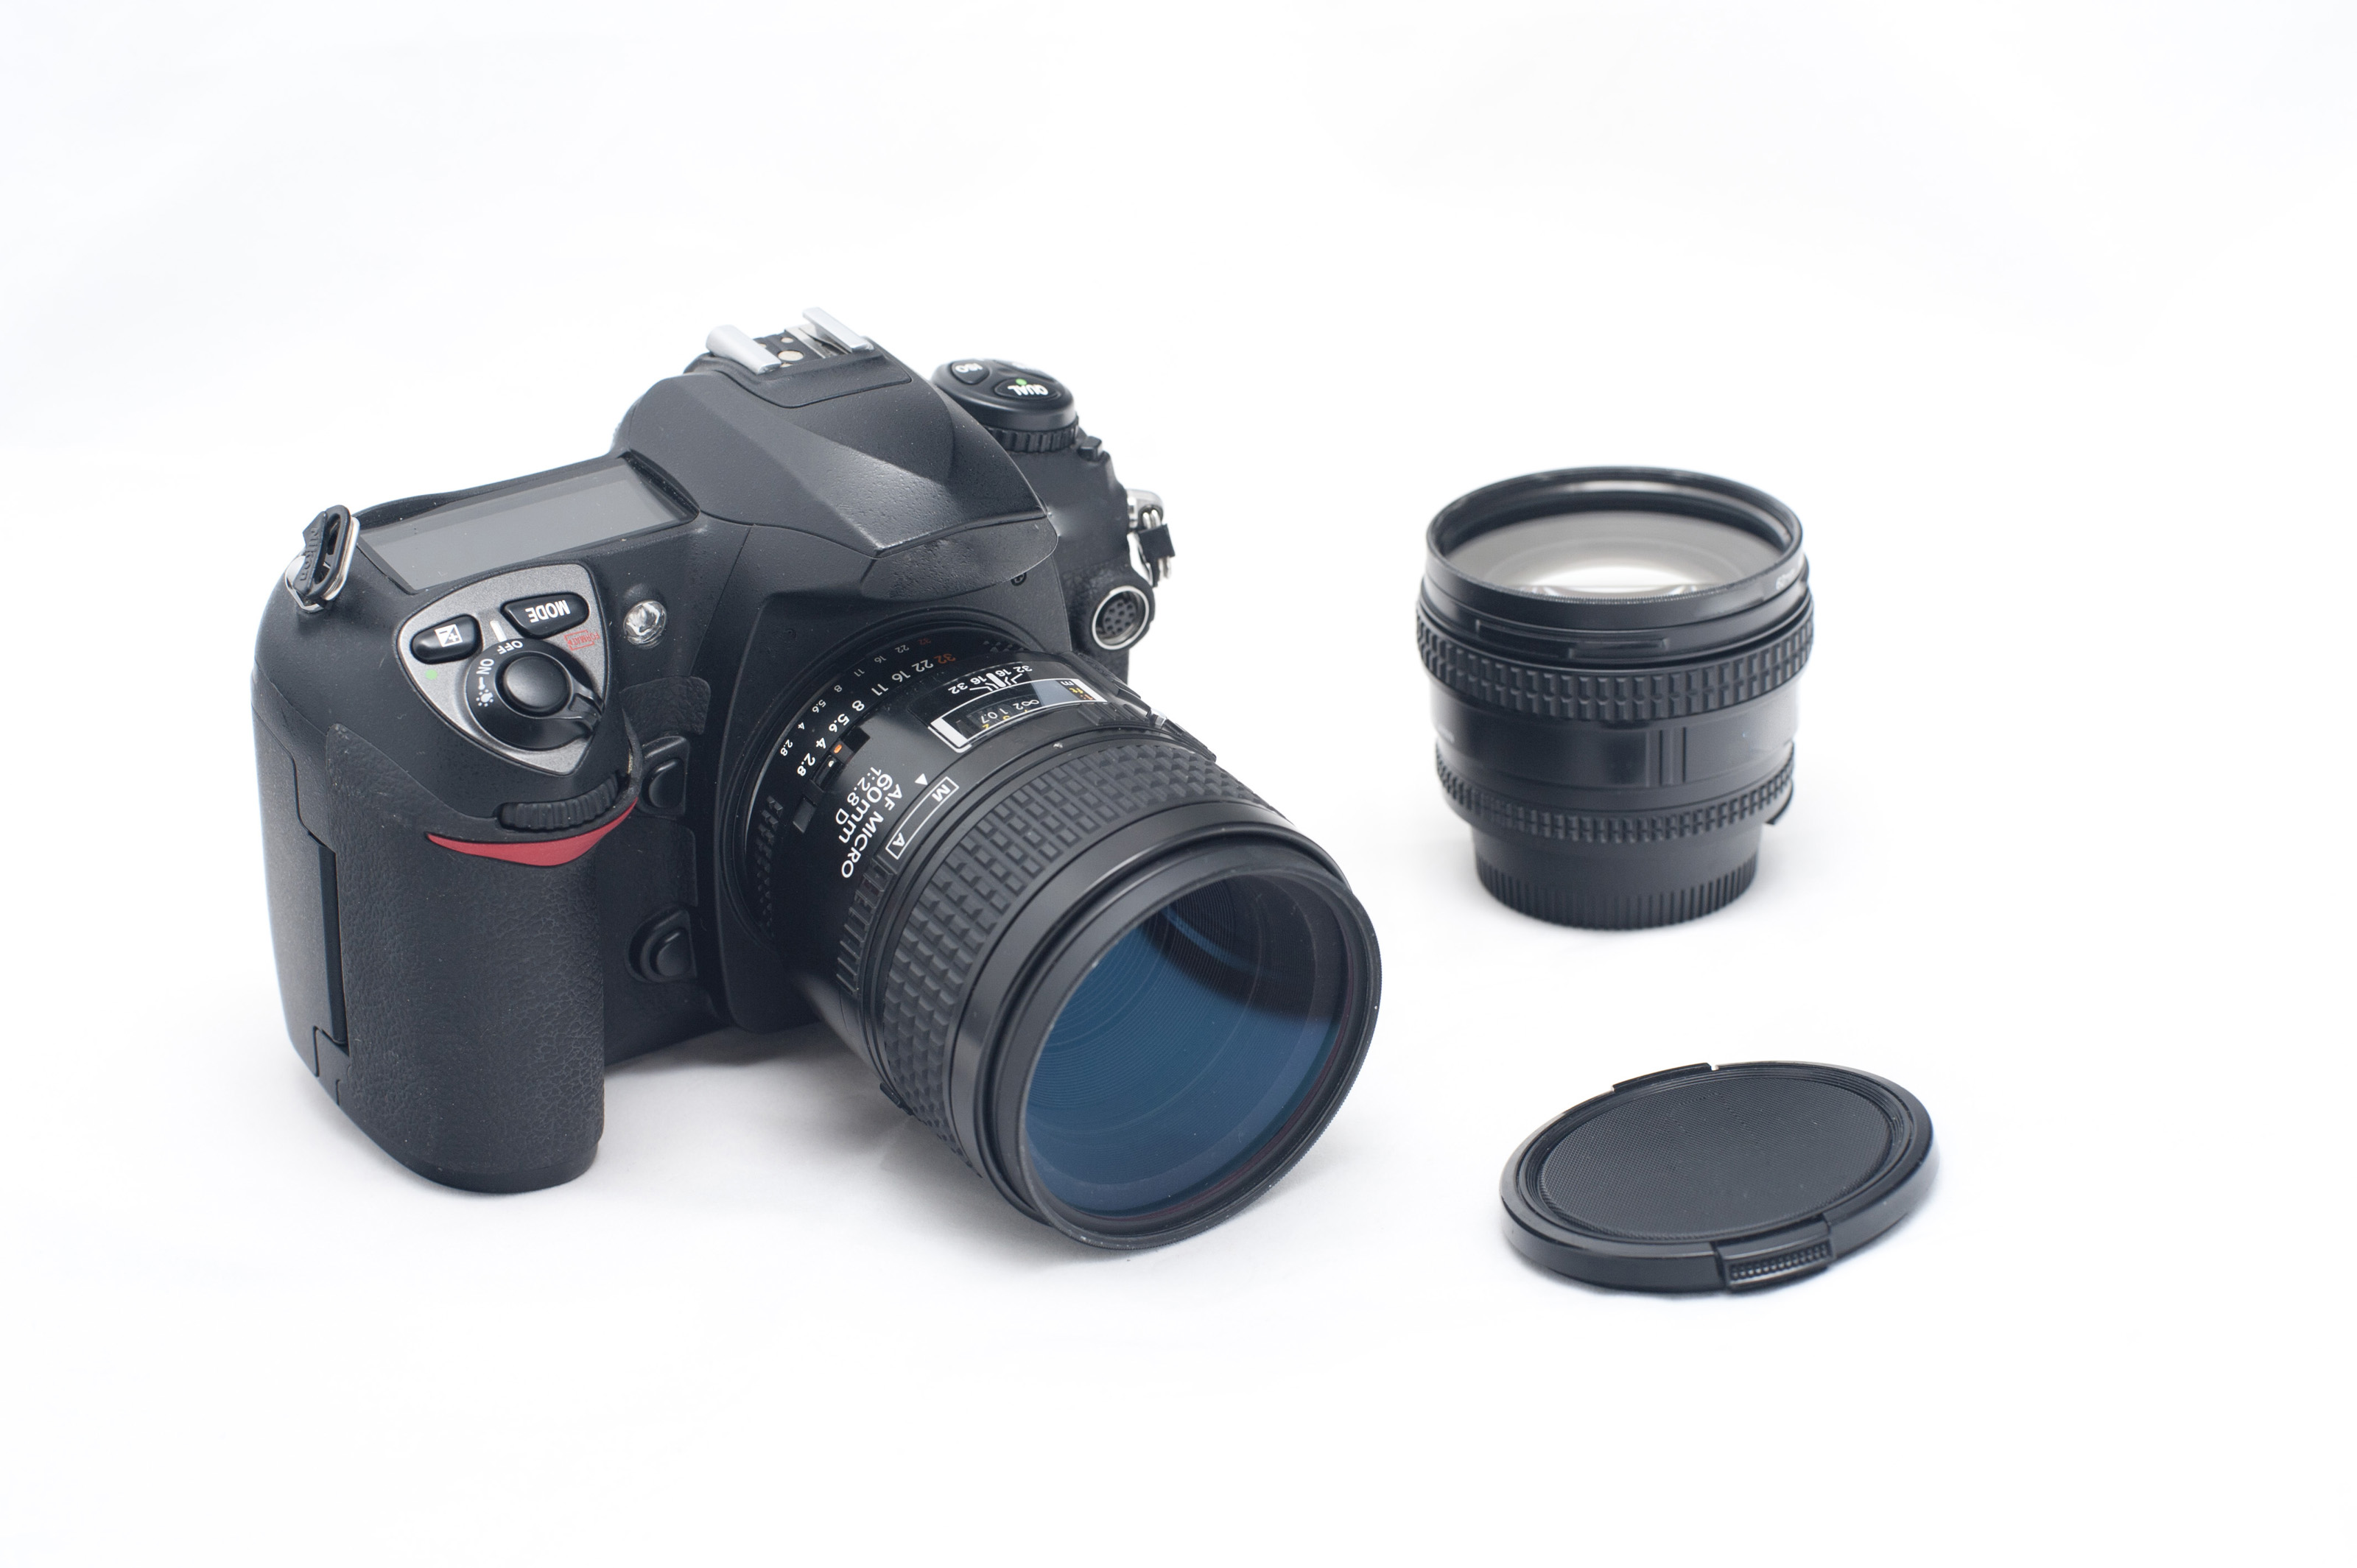 Free Stock Photo 12165 Digital SLR Camera with Lenses and Lens Cap